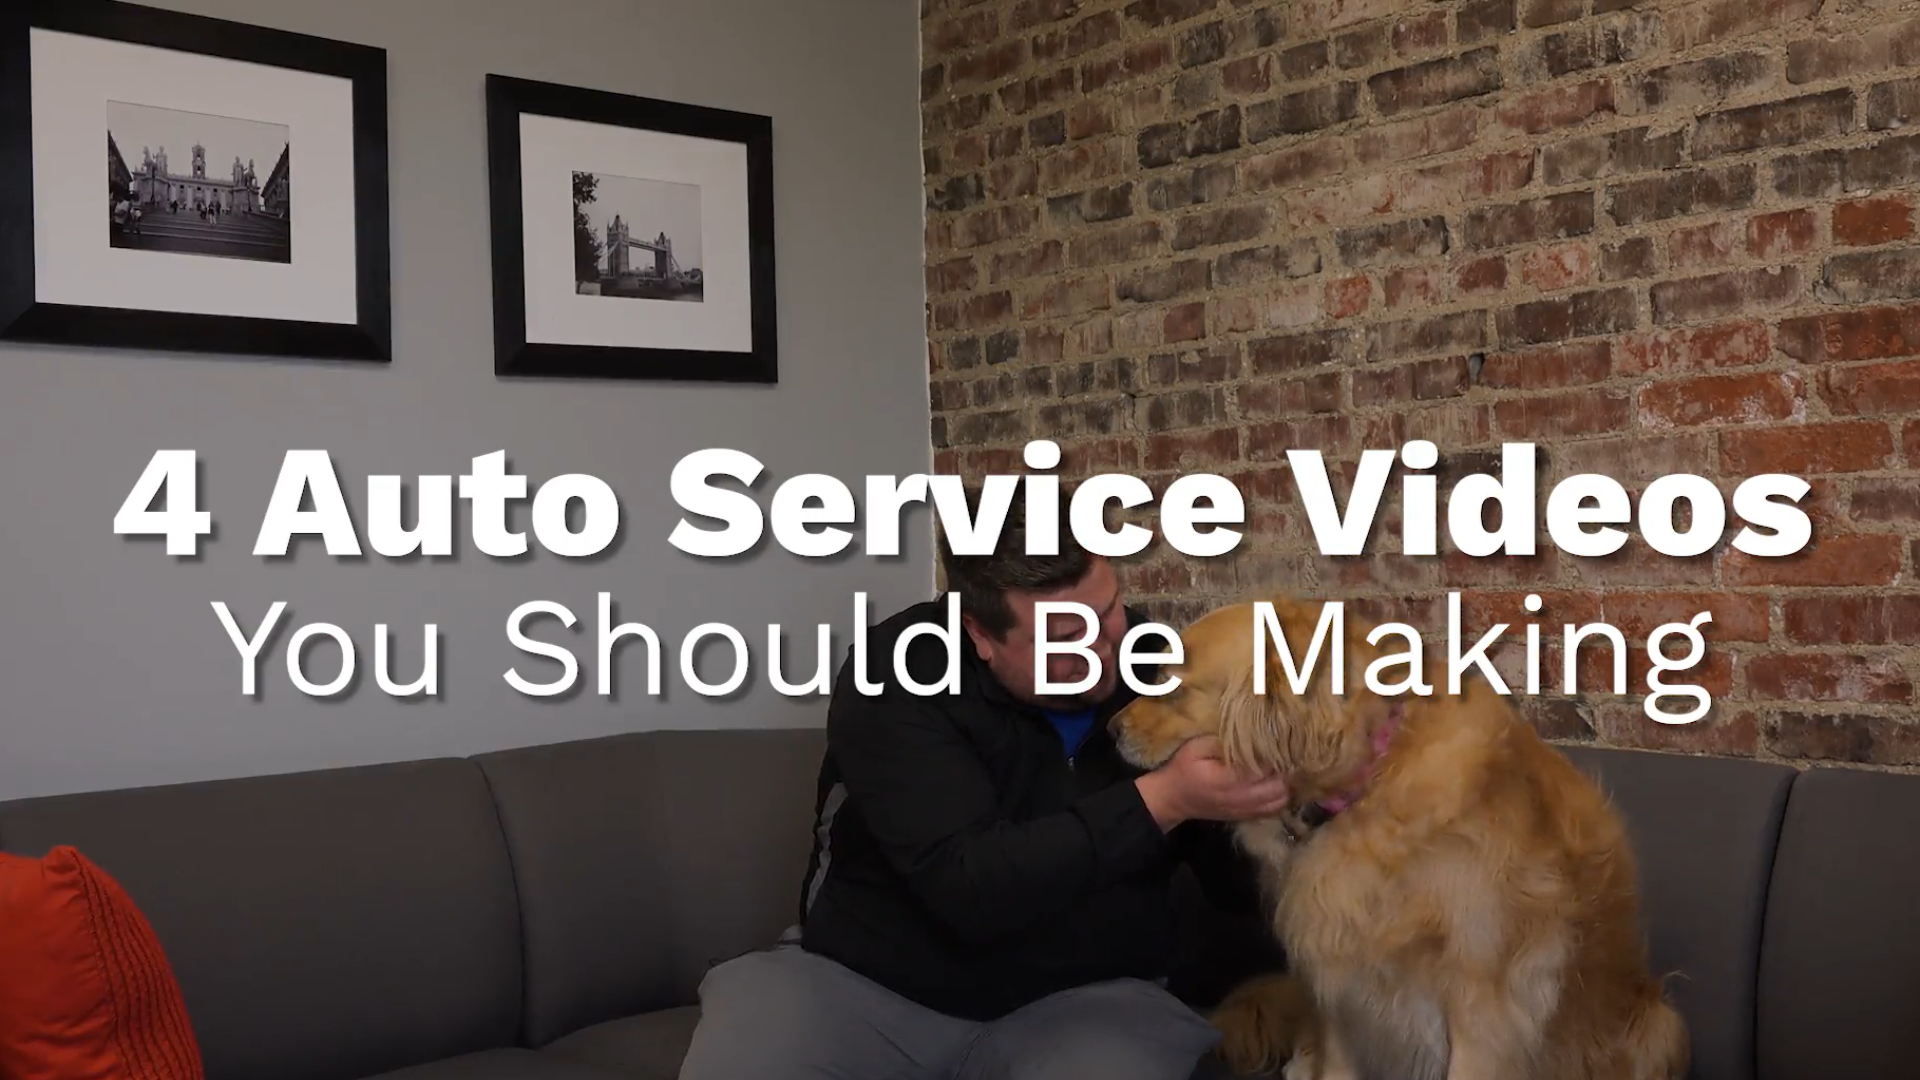 4 Auto Service Videos You Should Be Making